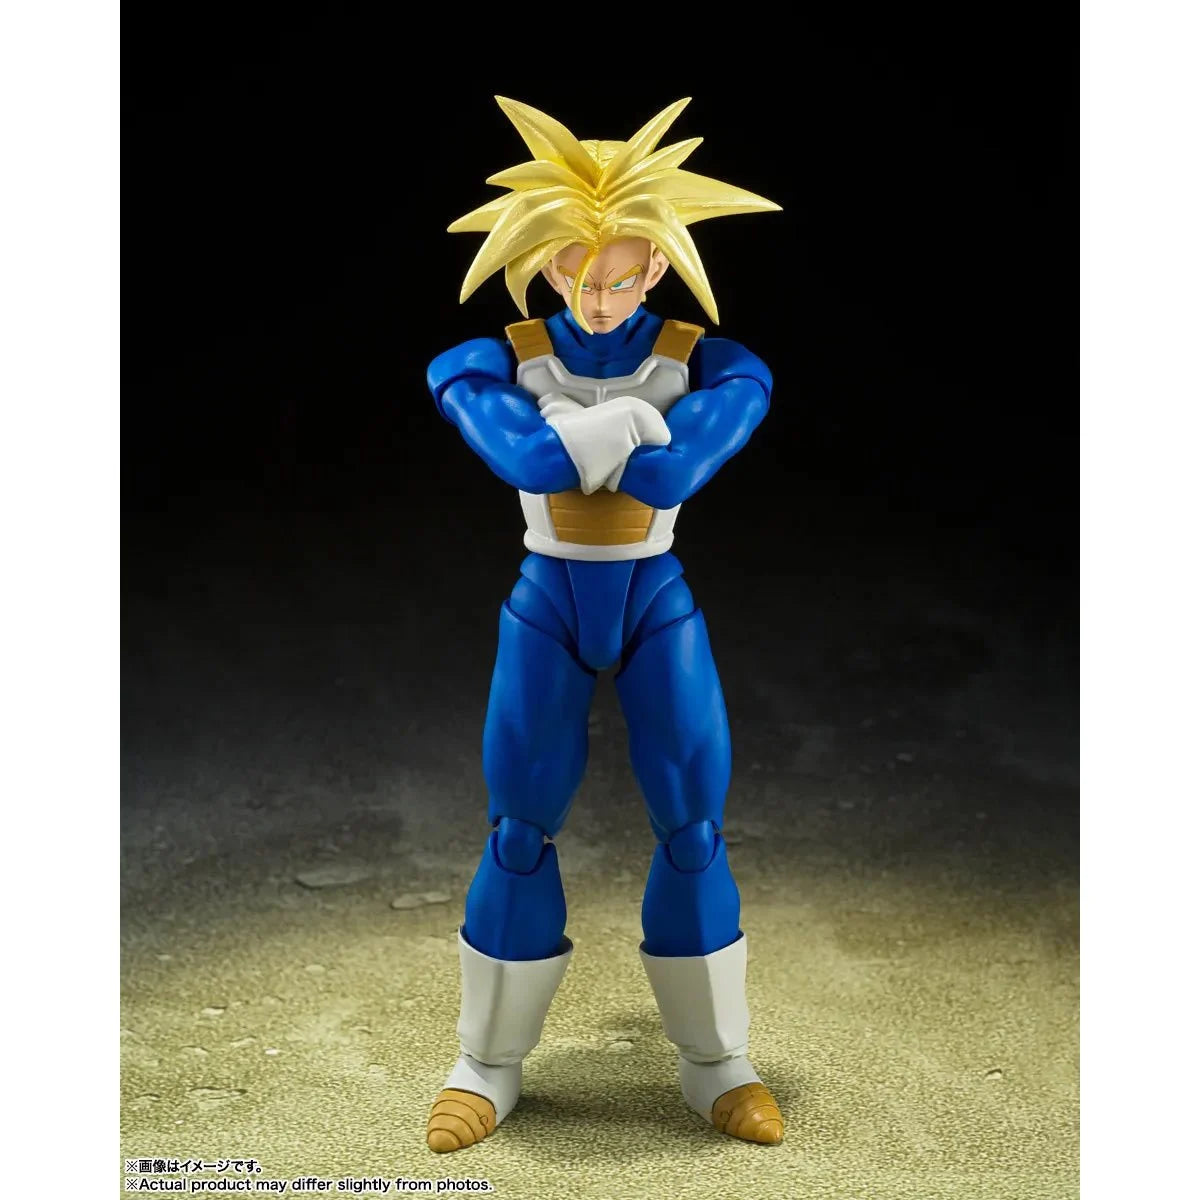 Dragon Ball SS Trunks Infinte Latent Super Power S.H. Figuarts Figure by Bandai -Tamashii Nations - India - www.superherotoystore.com